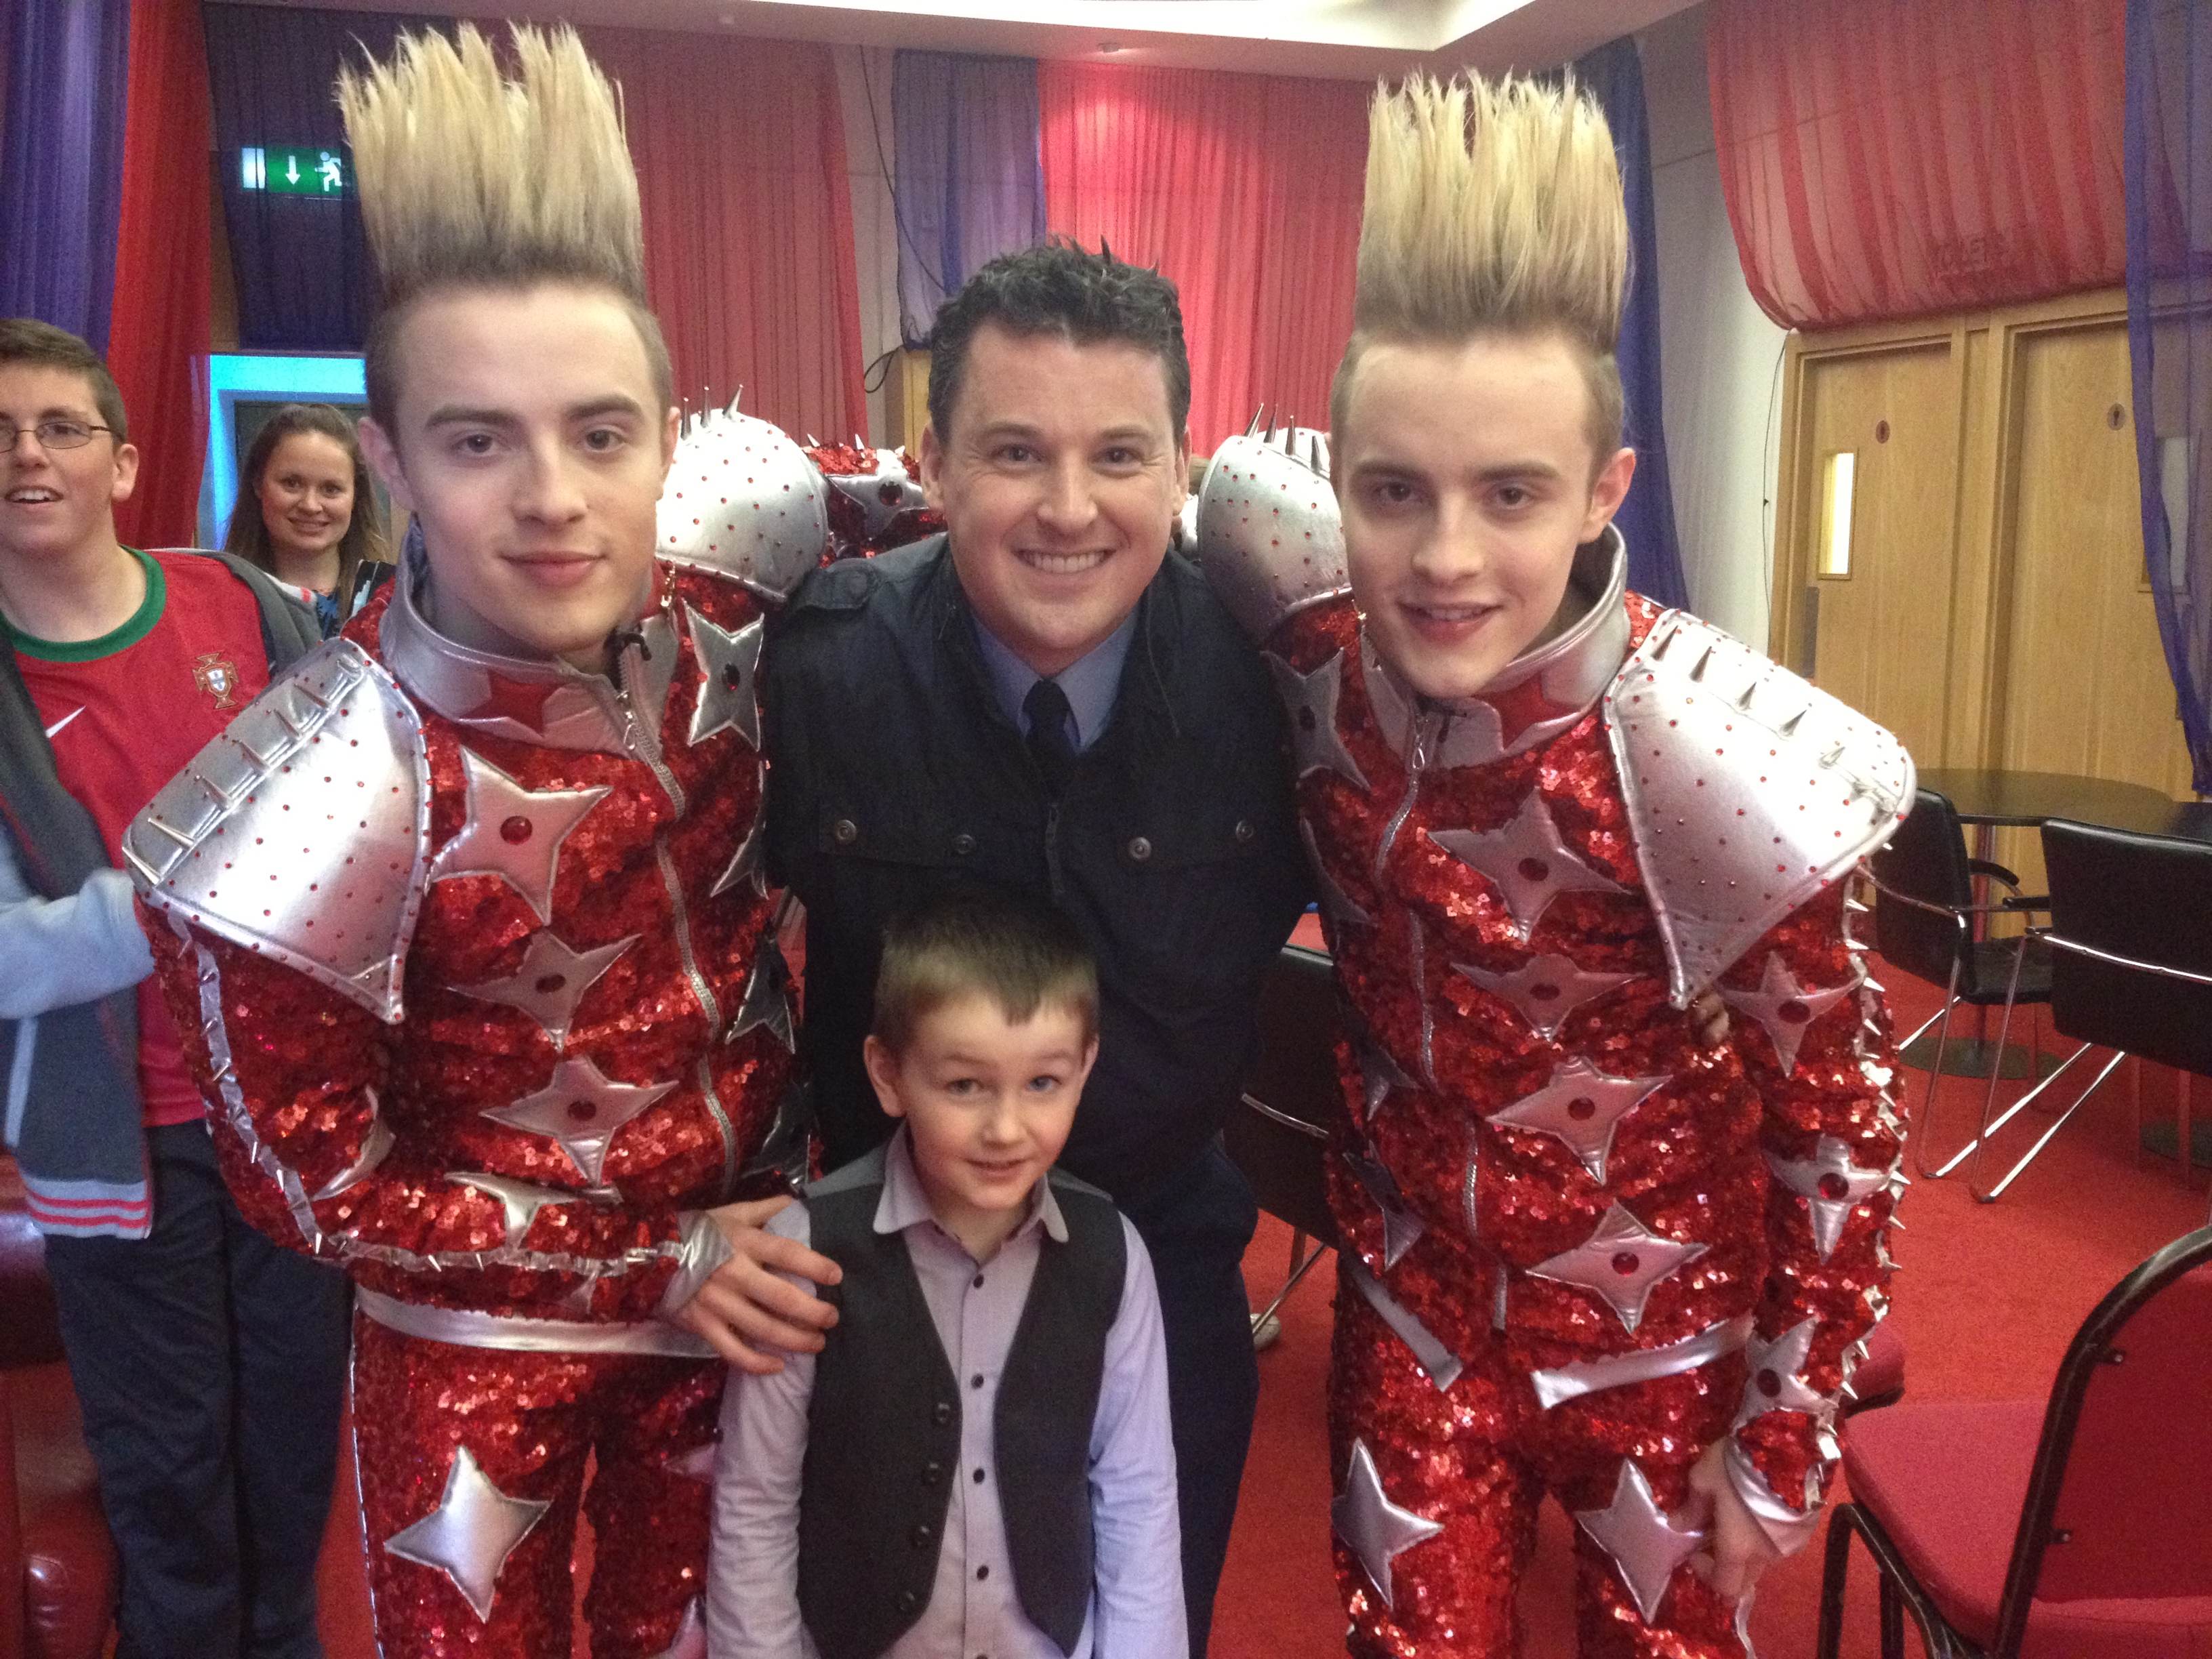 On set for filming JEDWARD'S DREAM FACTORY at RTE Studios. with Dylan Lavelle.